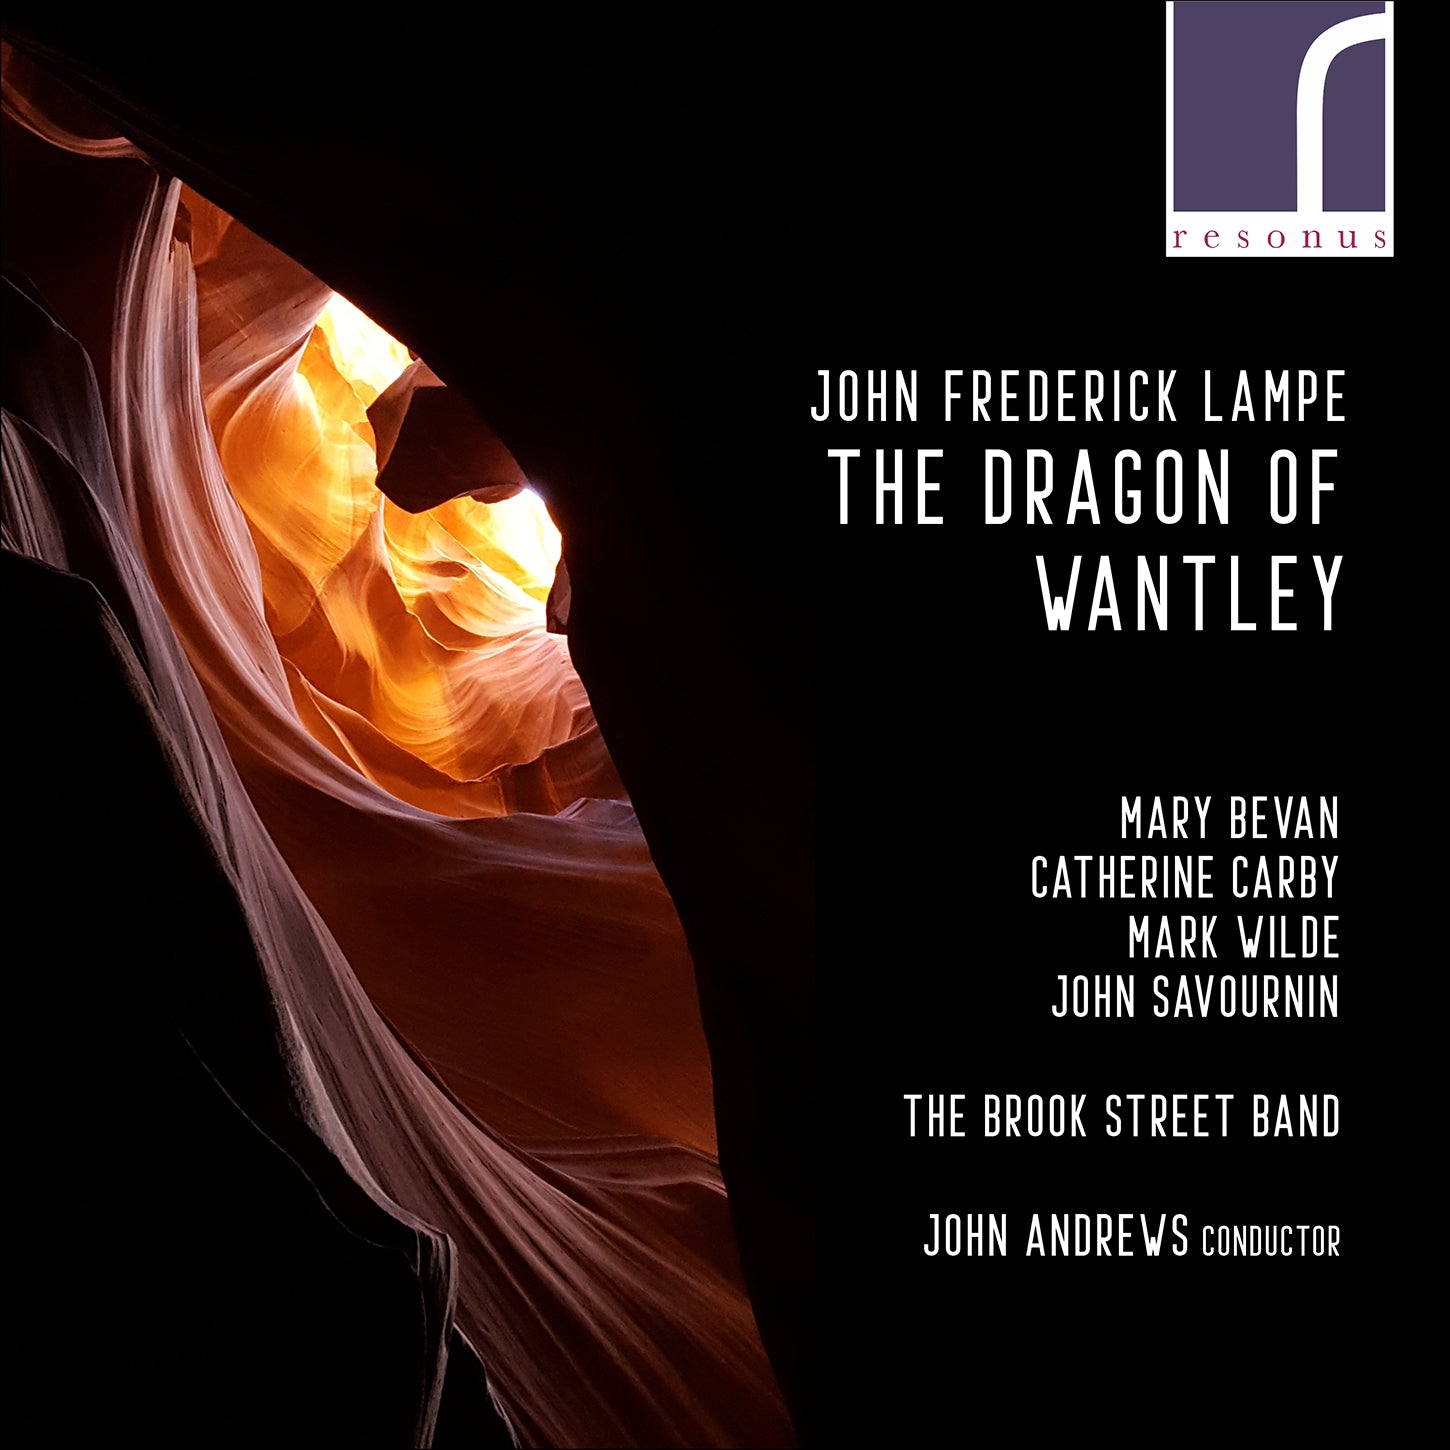 Lampe: The Dragon of Wantley / Bevan, Carby, Andrews, The Brook Street Band